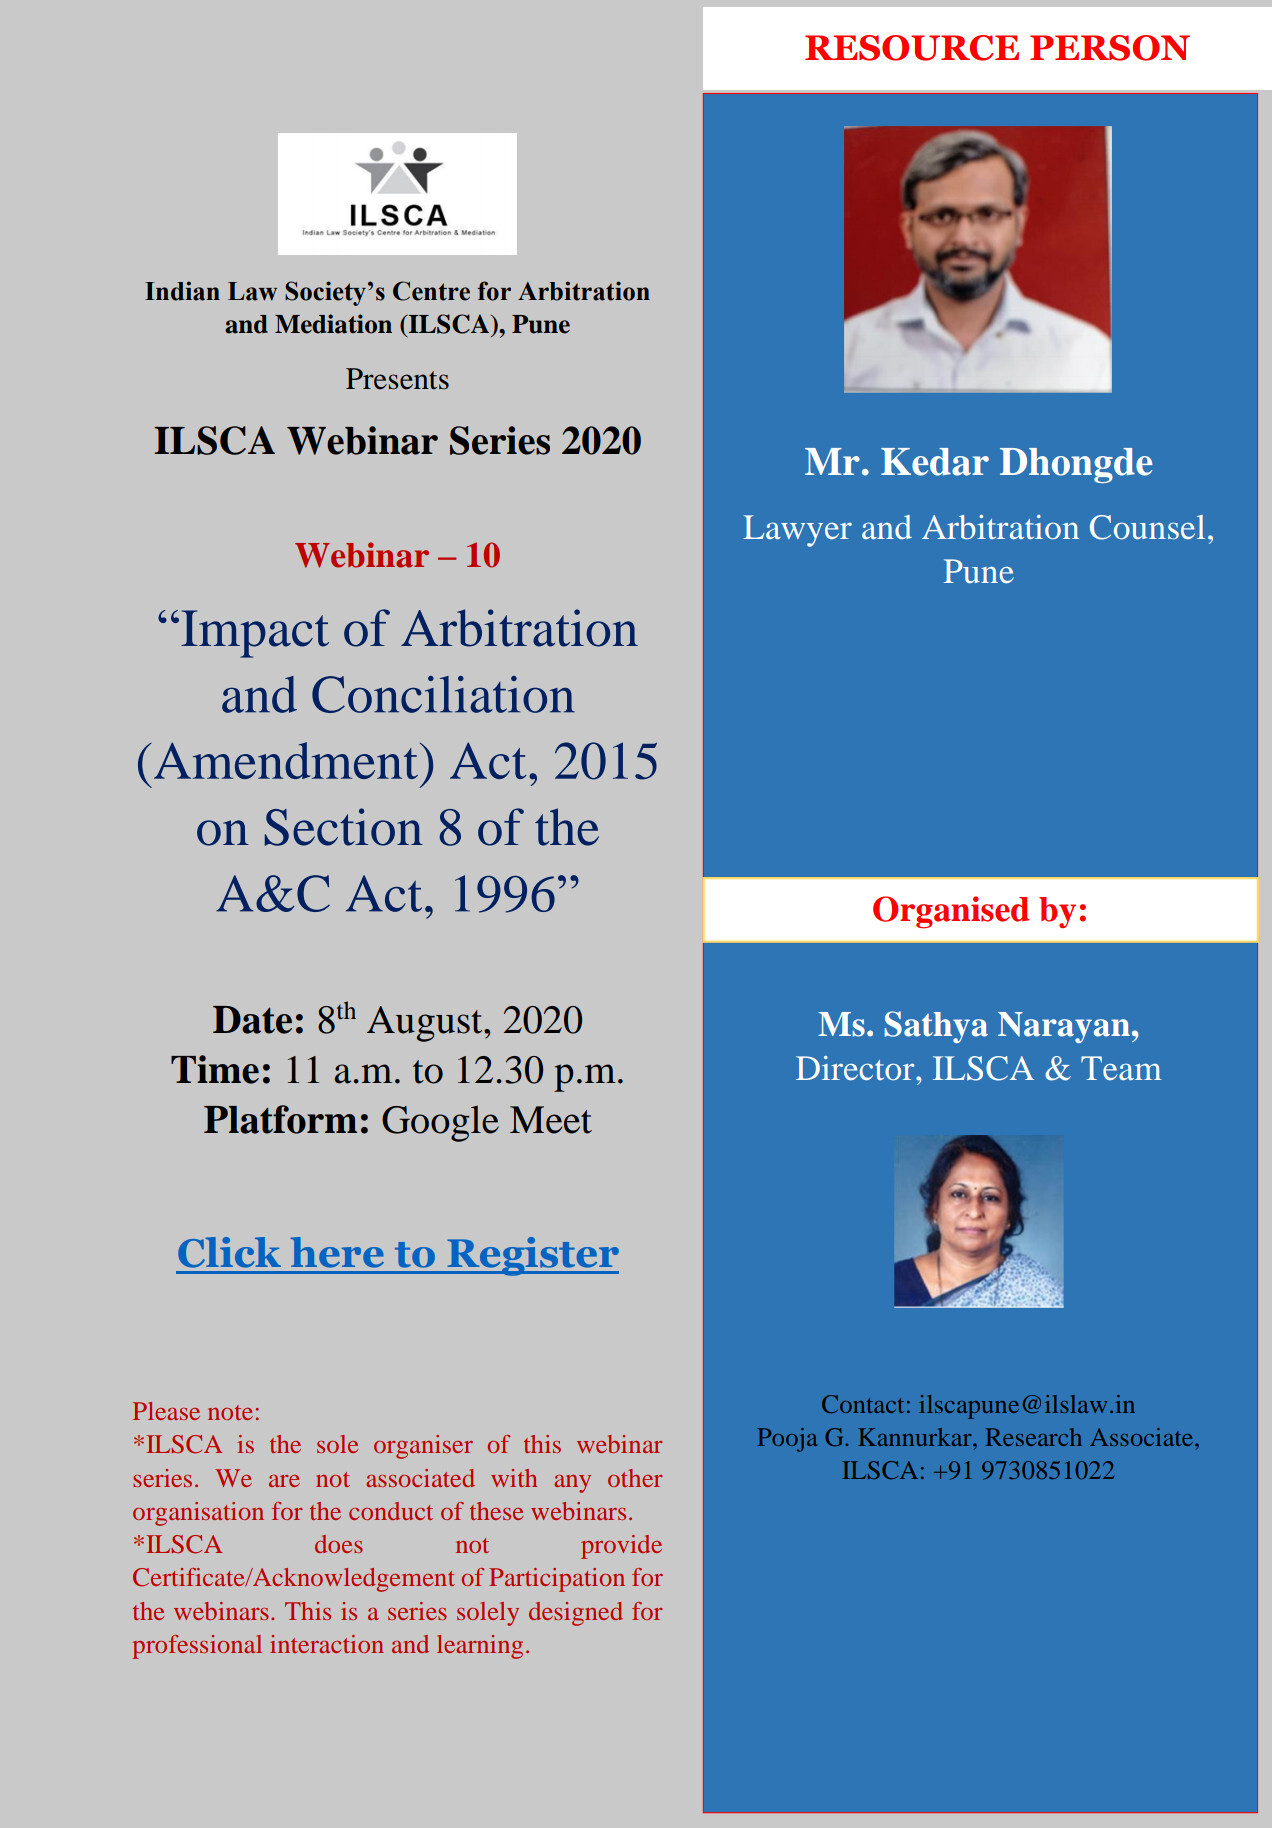 Impact of Arbitration and Conciliation (Amendment) Act, 2015 on Section 8 of the A&C Act, 1996